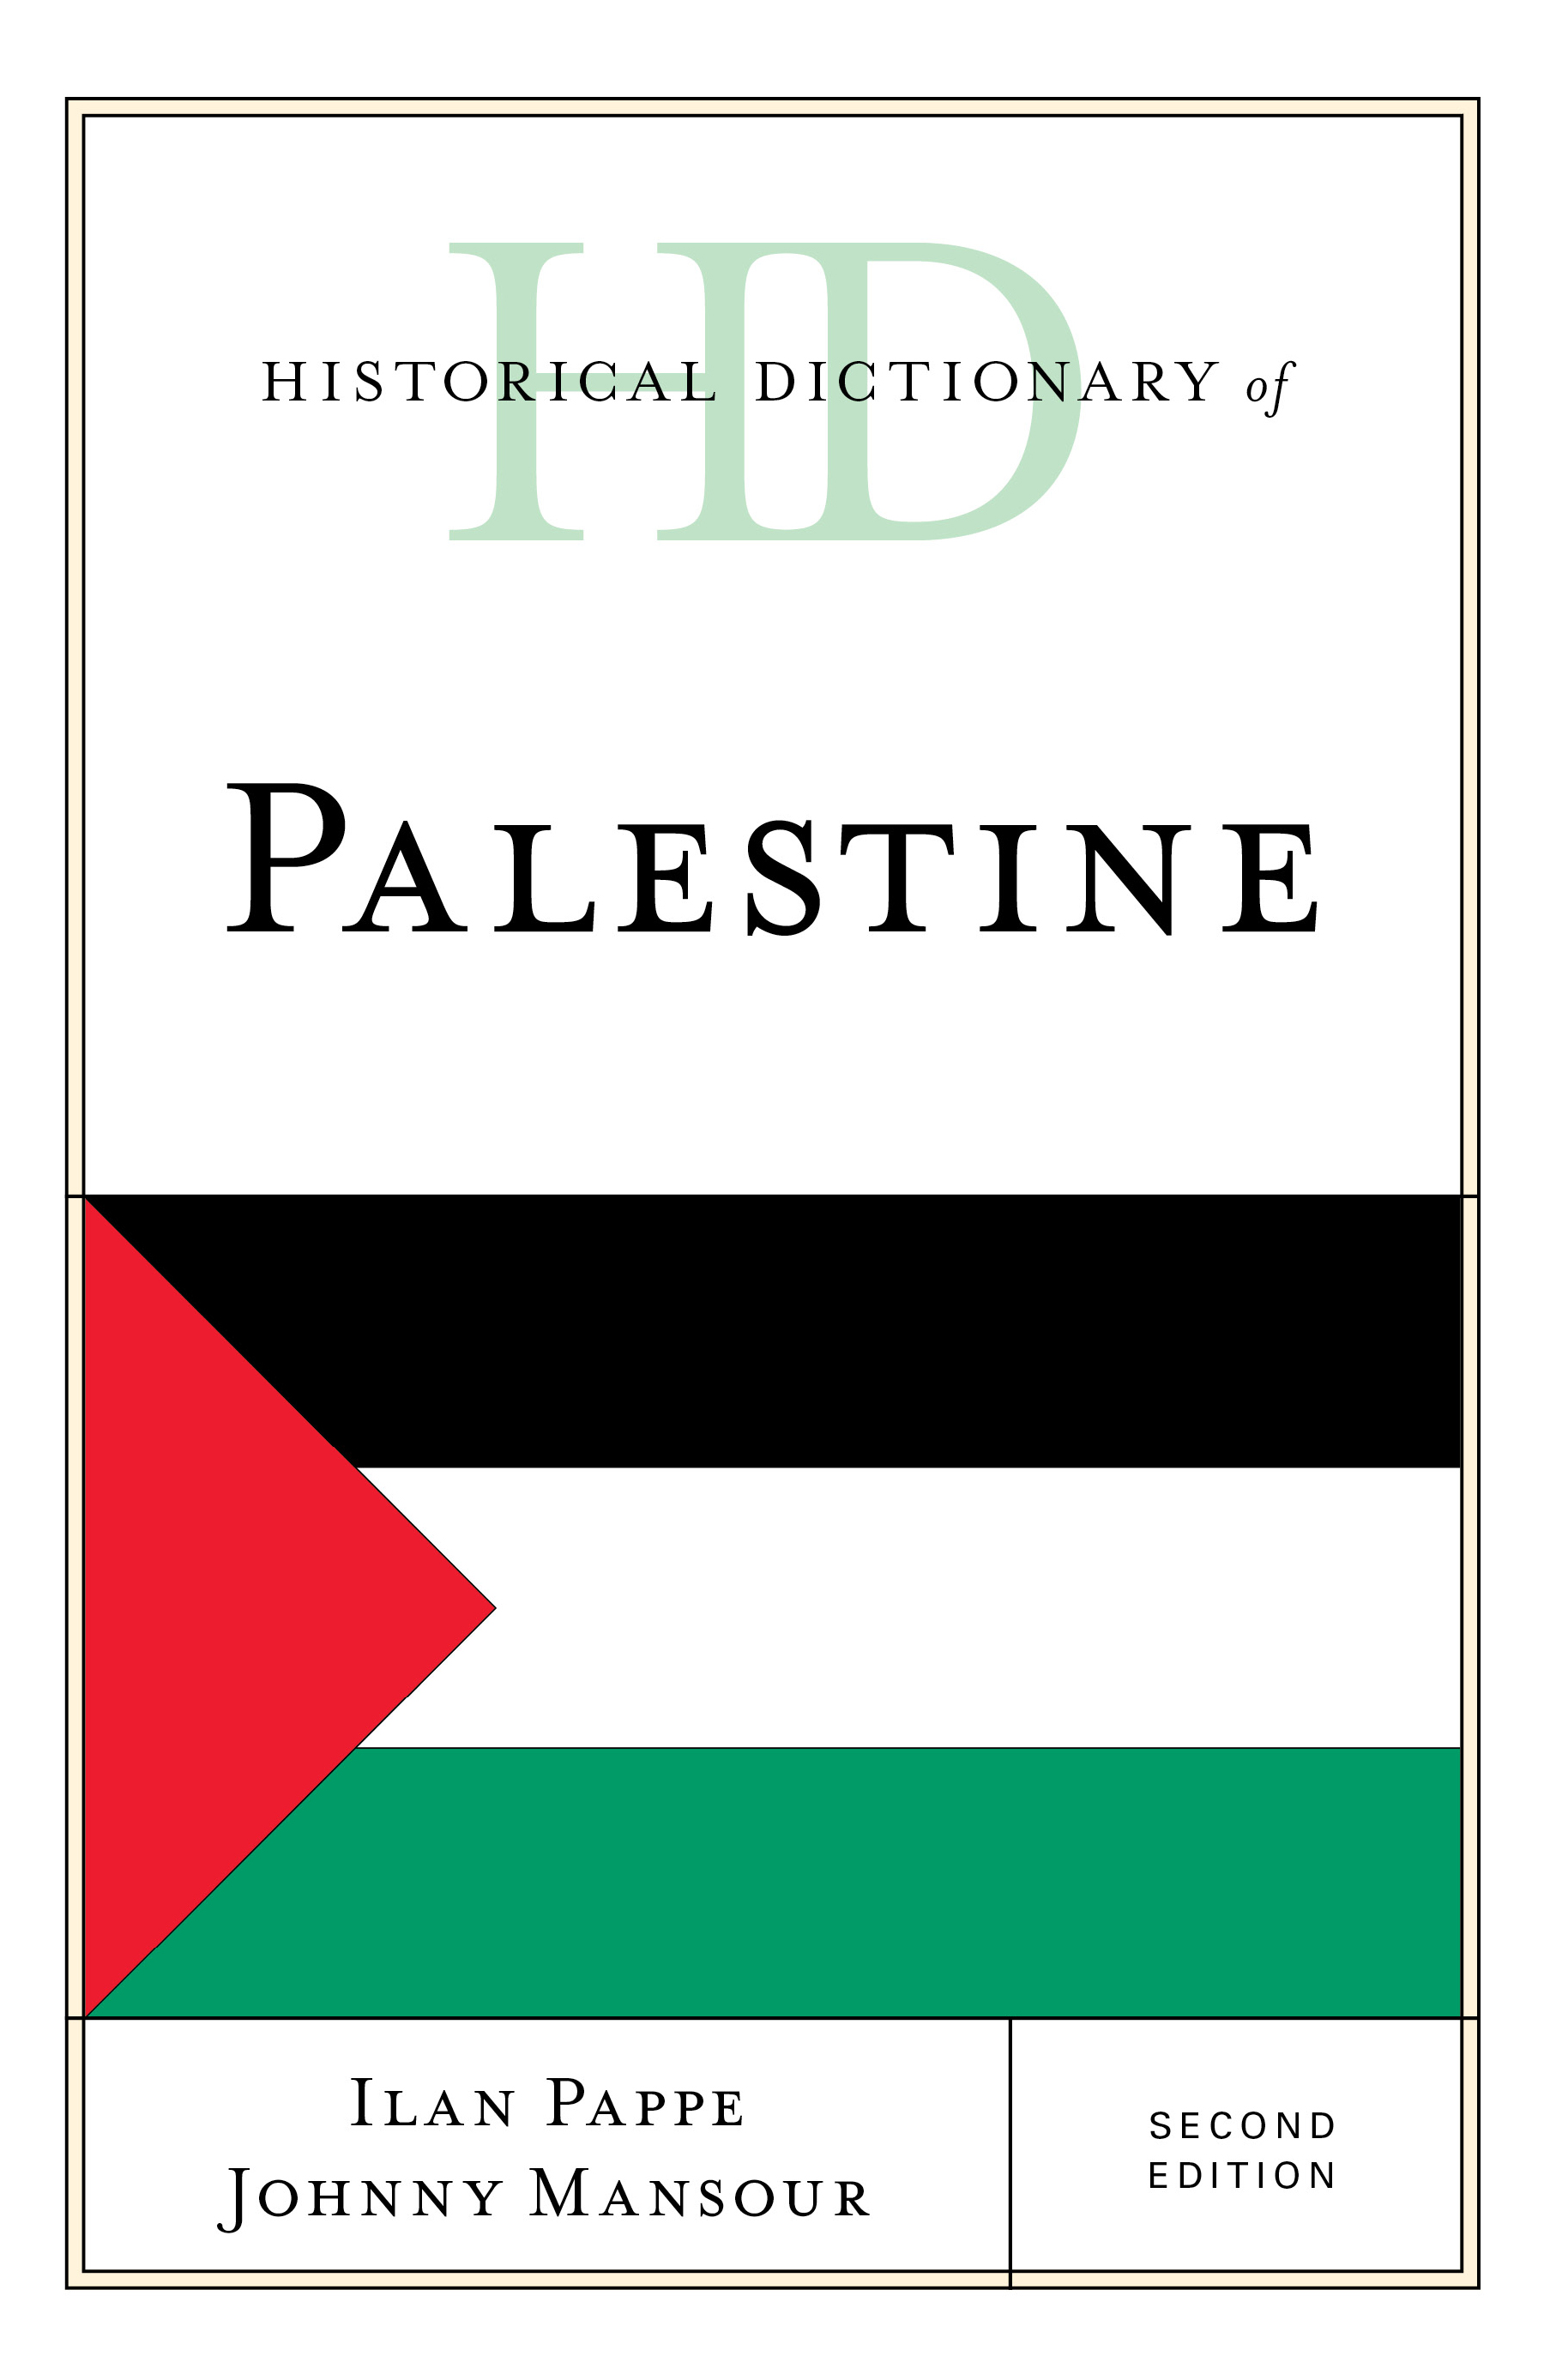 Historical Dictionary of Palestine by: Ilan Pappe - 9781538119860